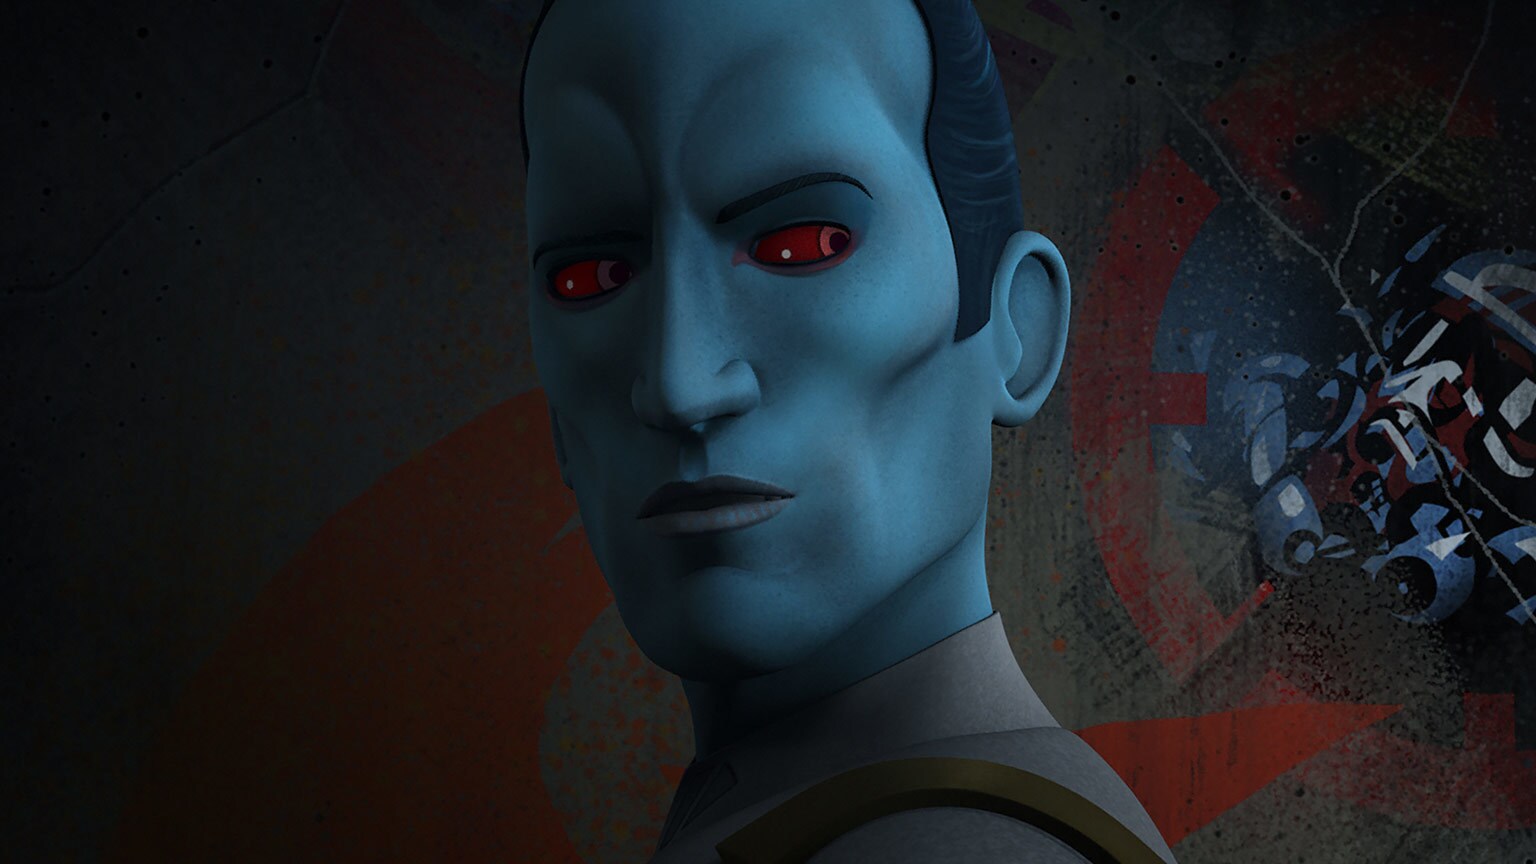 Star Wars Rebels: Complete Season Three Arrives on Blu-ray and DVD August 29